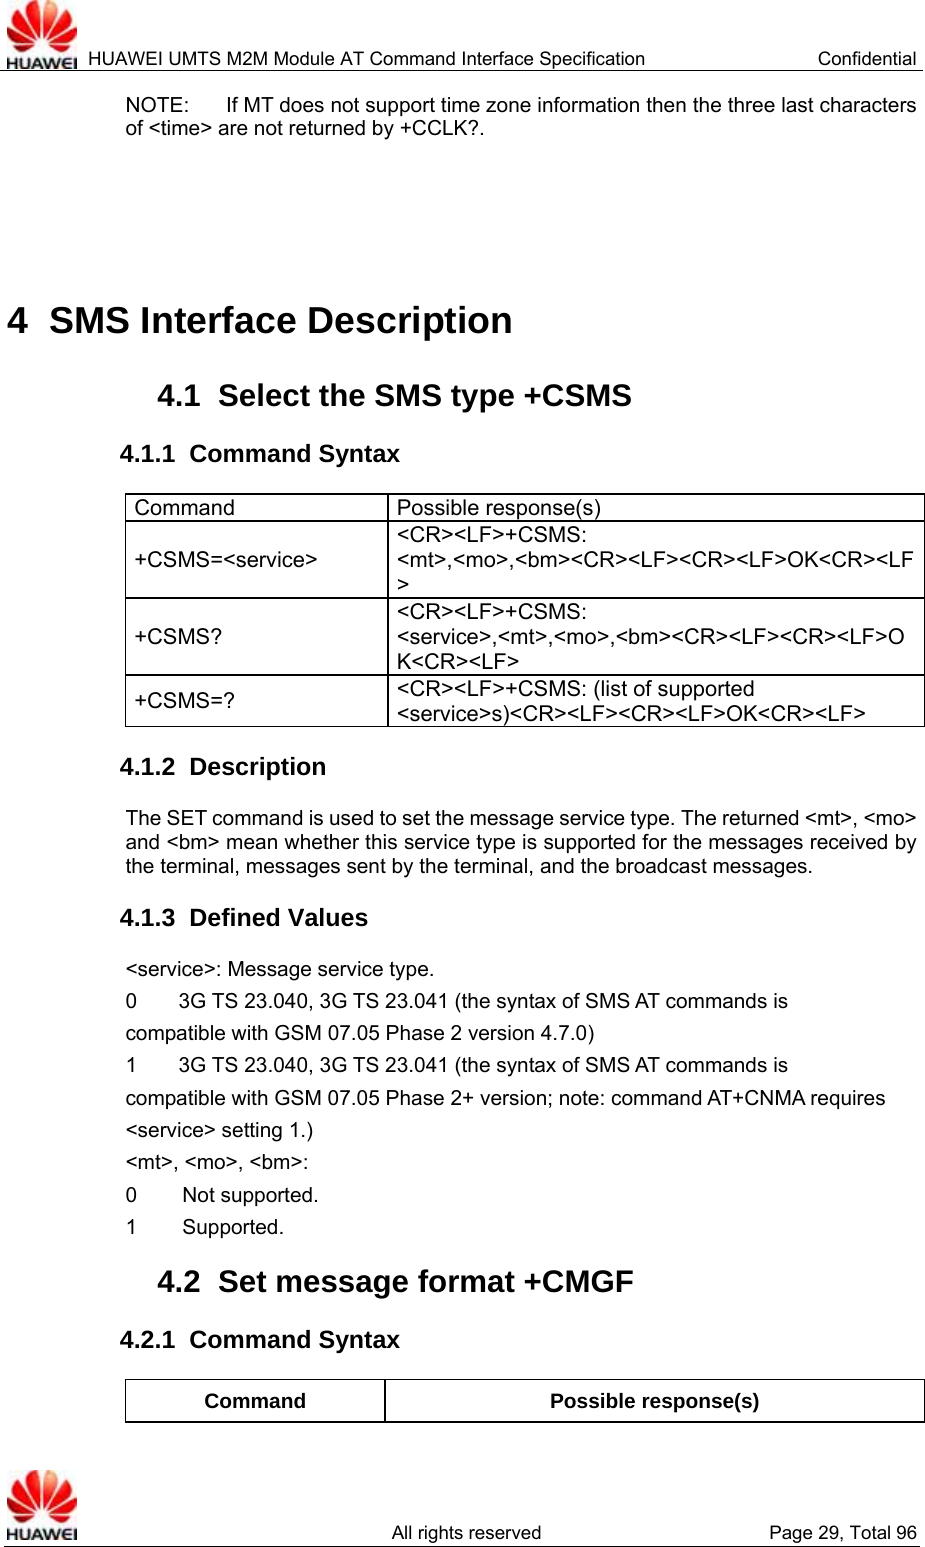  HUAWEI UMTS M2M Module AT Command Interface Specification  Confidential   All rights reserved  Page 29, Total 96 NOTE:  If MT does not support time zone information then the three last characters of &lt;time&gt; are not returned by +CCLK?.    4  SMS Interface Description 4.1  Select the SMS type +CSMS 4.1.1  Command Syntax Command Possible response(s) +CSMS=&lt;service&gt; &lt;CR&gt;&lt;LF&gt;+CSMS: &lt;mt&gt;,&lt;mo&gt;,&lt;bm&gt;&lt;CR&gt;&lt;LF&gt;&lt;CR&gt;&lt;LF&gt;OK&lt;CR&gt;&lt;LF&gt; +CSMS? &lt;CR&gt;&lt;LF&gt;+CSMS: &lt;service&gt;,&lt;mt&gt;,&lt;mo&gt;,&lt;bm&gt;&lt;CR&gt;&lt;LF&gt;&lt;CR&gt;&lt;LF&gt;OK&lt;CR&gt;&lt;LF&gt; +CSMS=?  &lt;CR&gt;&lt;LF&gt;+CSMS: (list of supported &lt;service&gt;s)&lt;CR&gt;&lt;LF&gt;&lt;CR&gt;&lt;LF&gt;OK&lt;CR&gt;&lt;LF&gt; 4.1.2  Description The SET command is used to set the message service type. The returned &lt;mt&gt;, &lt;mo&gt; and &lt;bm&gt; mean whether this service type is supported for the messages received by the terminal, messages sent by the terminal, and the broadcast messages.   4.1.3  Defined Values &lt;service&gt;: Message service type. 0        3G TS 23.040, 3G TS 23.041 (the syntax of SMS AT commands is compatible with GSM 07.05 Phase 2 version 4.7.0)   1        3G TS 23.040, 3G TS 23.041 (the syntax of SMS AT commands is compatible with GSM 07.05 Phase 2+ version; note: command AT+CNMA requires &lt;service&gt; setting 1.) &lt;mt&gt;, &lt;mo&gt;, &lt;bm&gt;:   0   Not  supported.   1   Supported.   4.2  Set message format +CMGF 4.2.1  Command Syntax Command Possible response(s) 